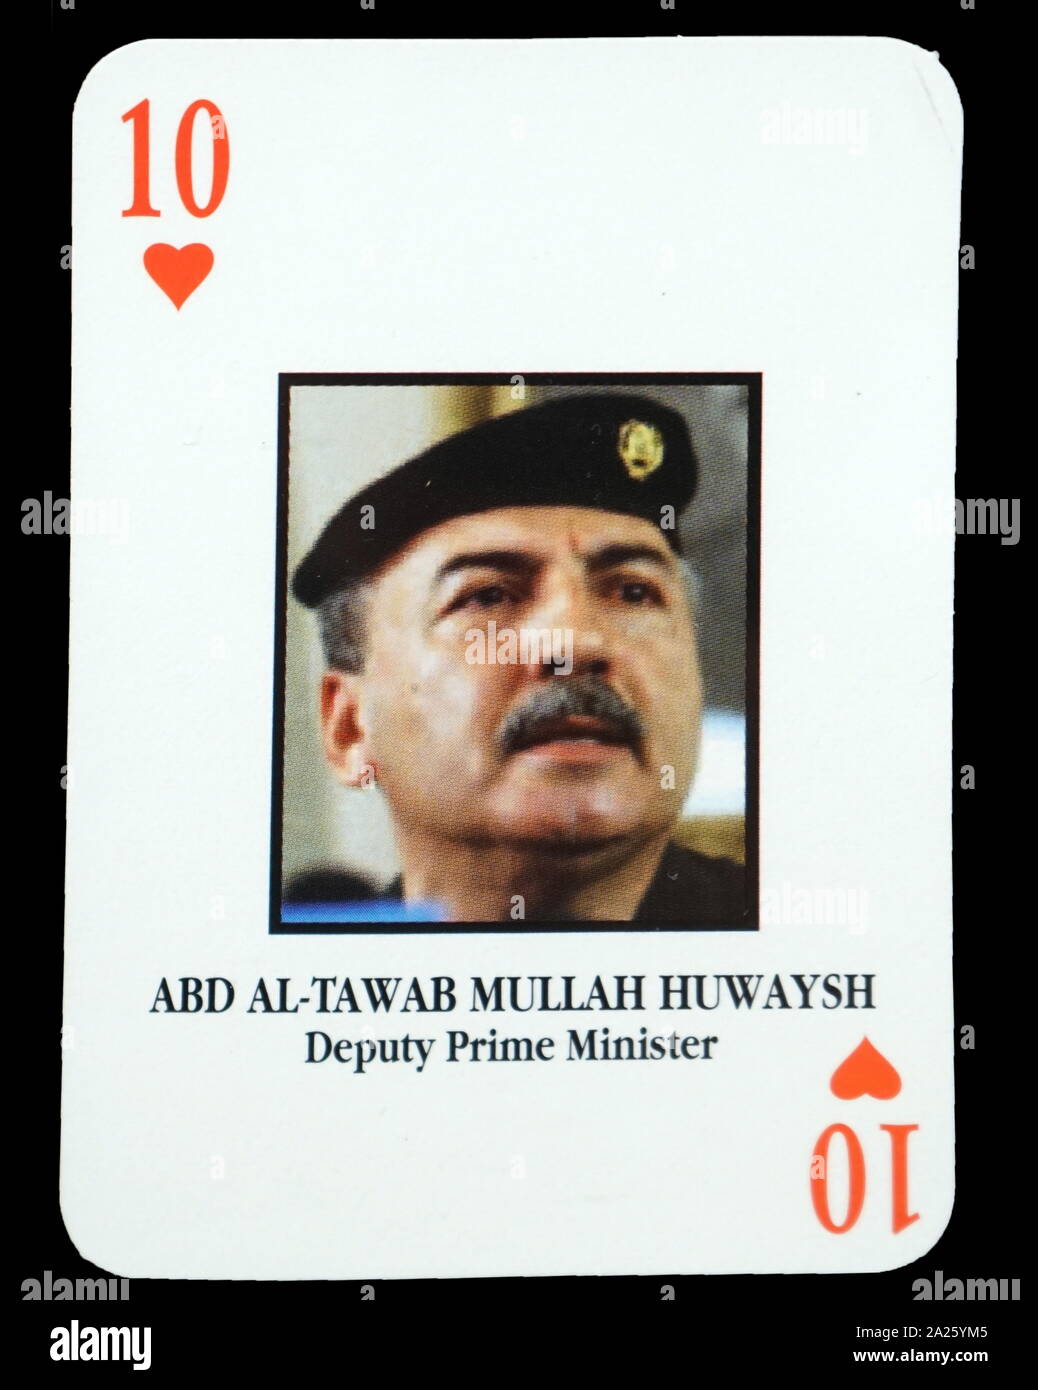 Most-wanted Iraqi playing cards - Abd Al-Tawab Mullah Huwaysh (Deputy Prime Minister). The U.S. military developed a set of playing cards to help troop identify the most-wanted members of President Saddam Hussein's government during the 2003 invasion of Iraq. Stock Photo